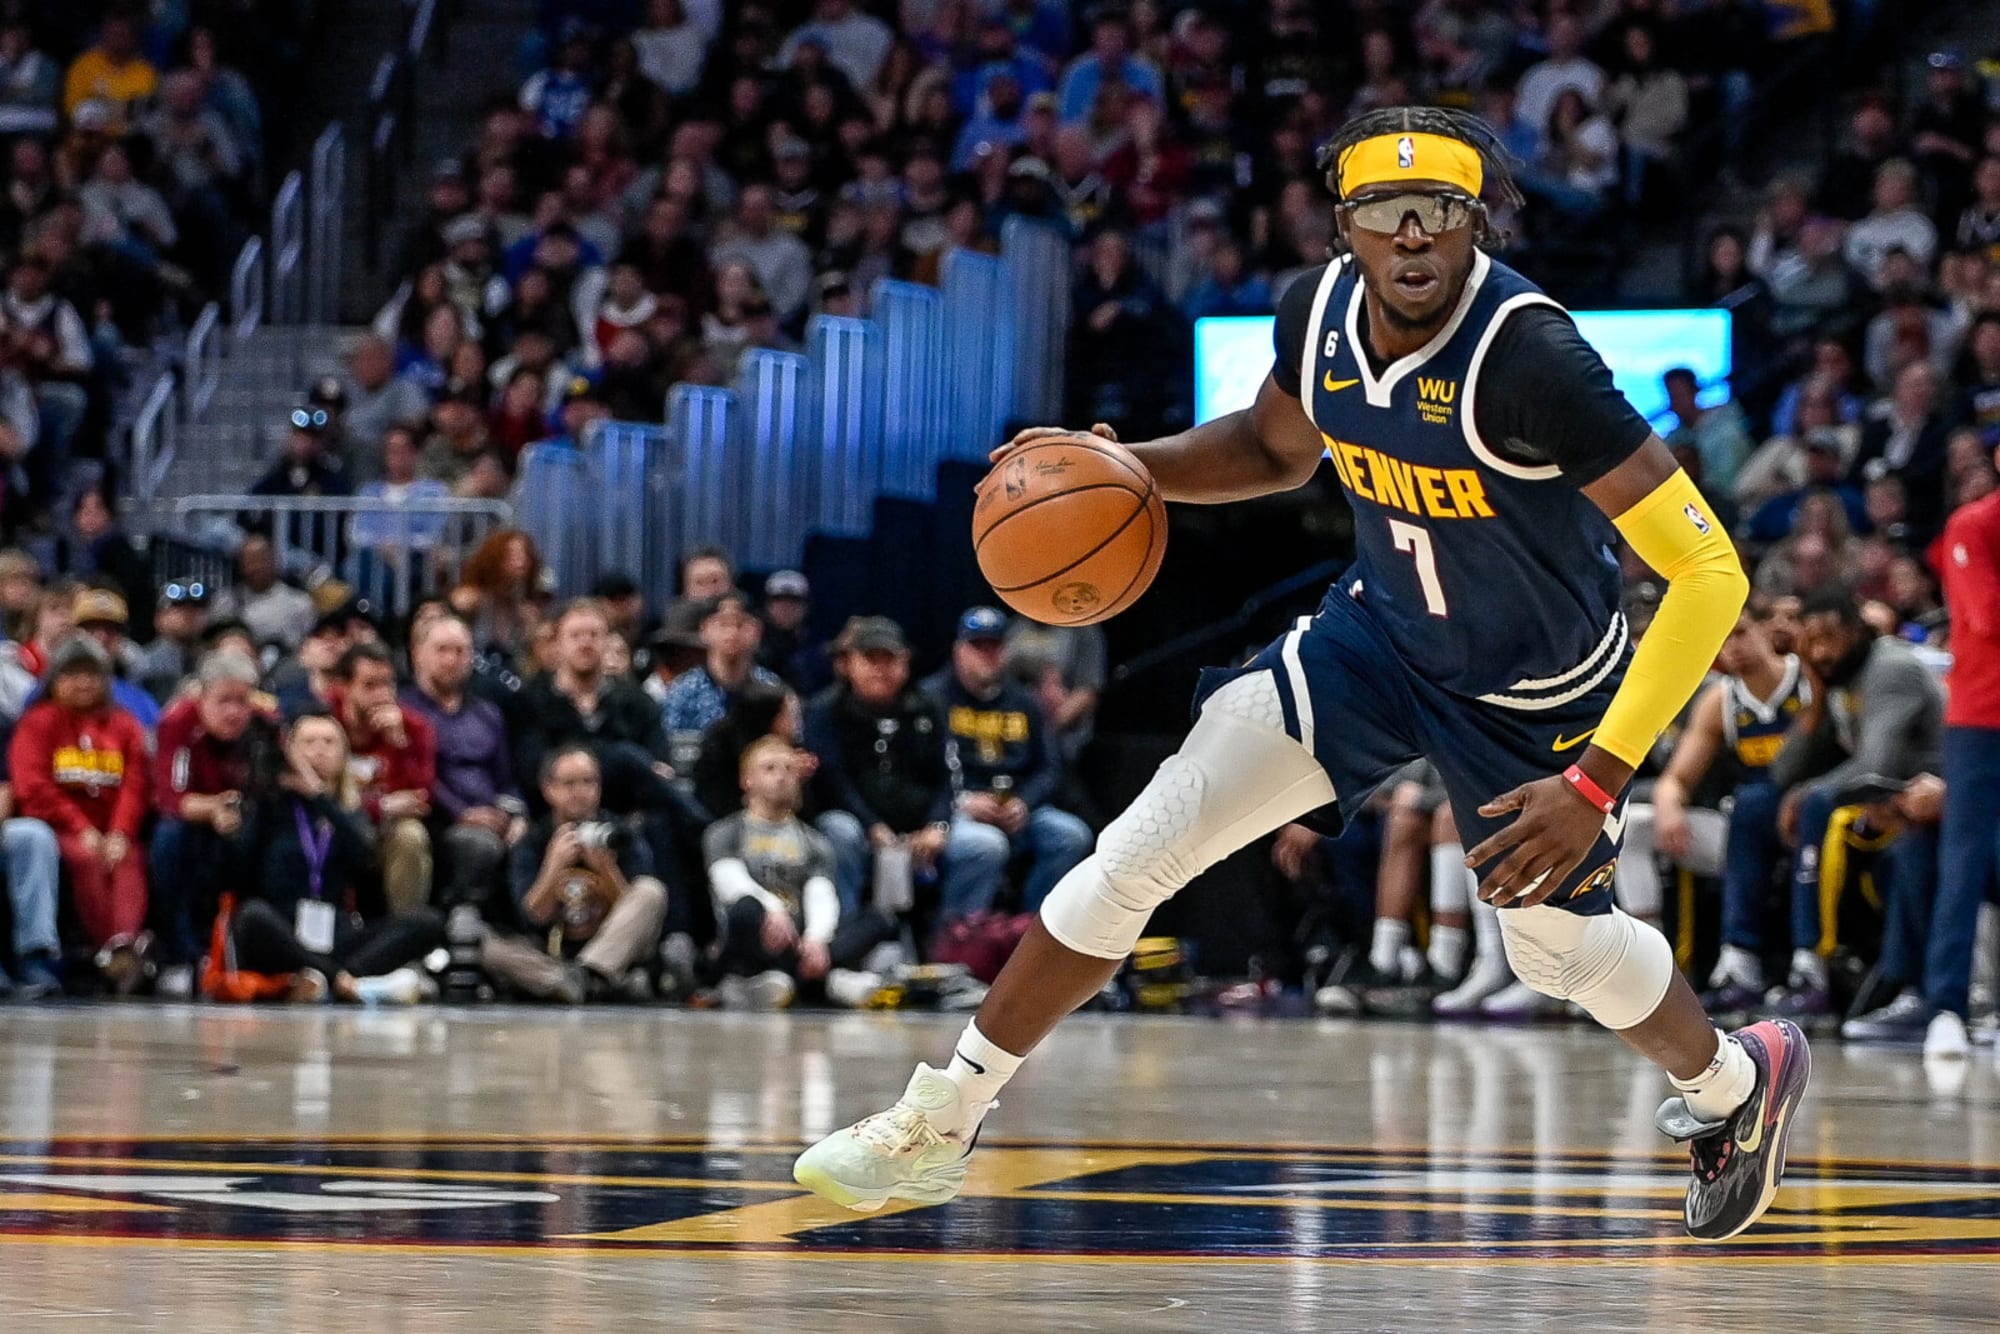 Reggie Jackson wins an NBA championship with the Denver Nuggets